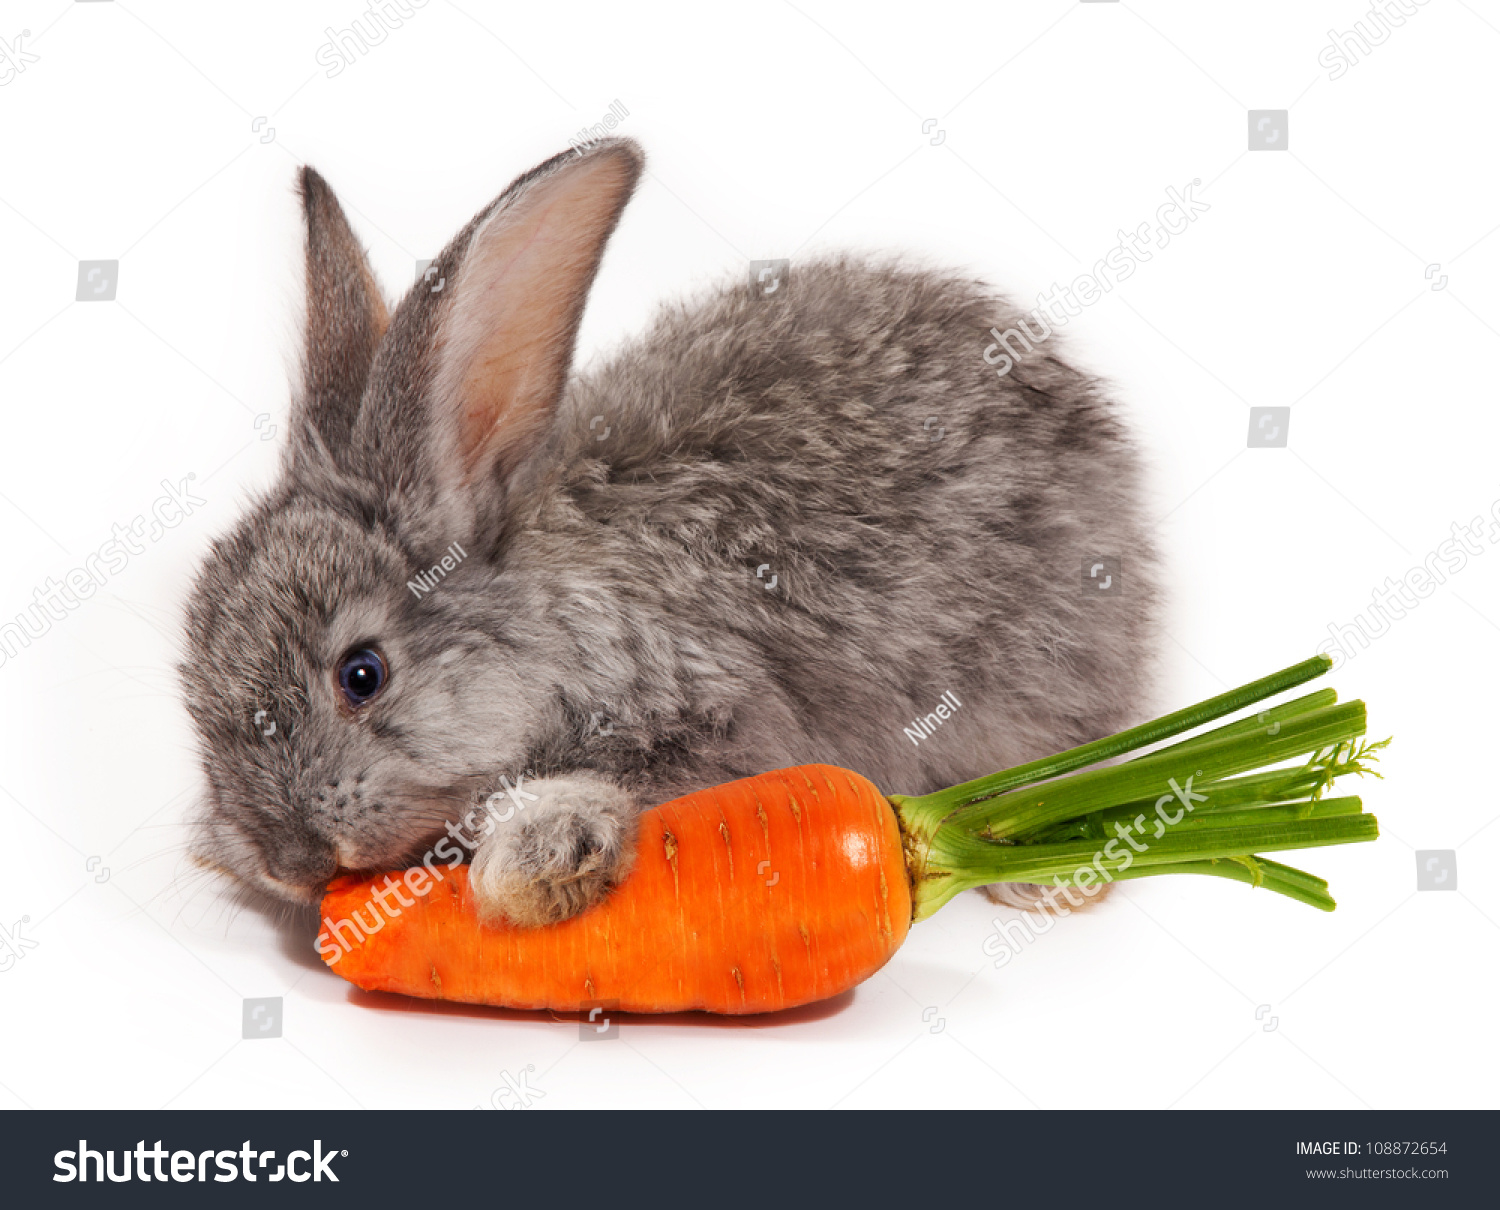 Rabbit With Carrot Isolated On White Background Stock Photo 108872654